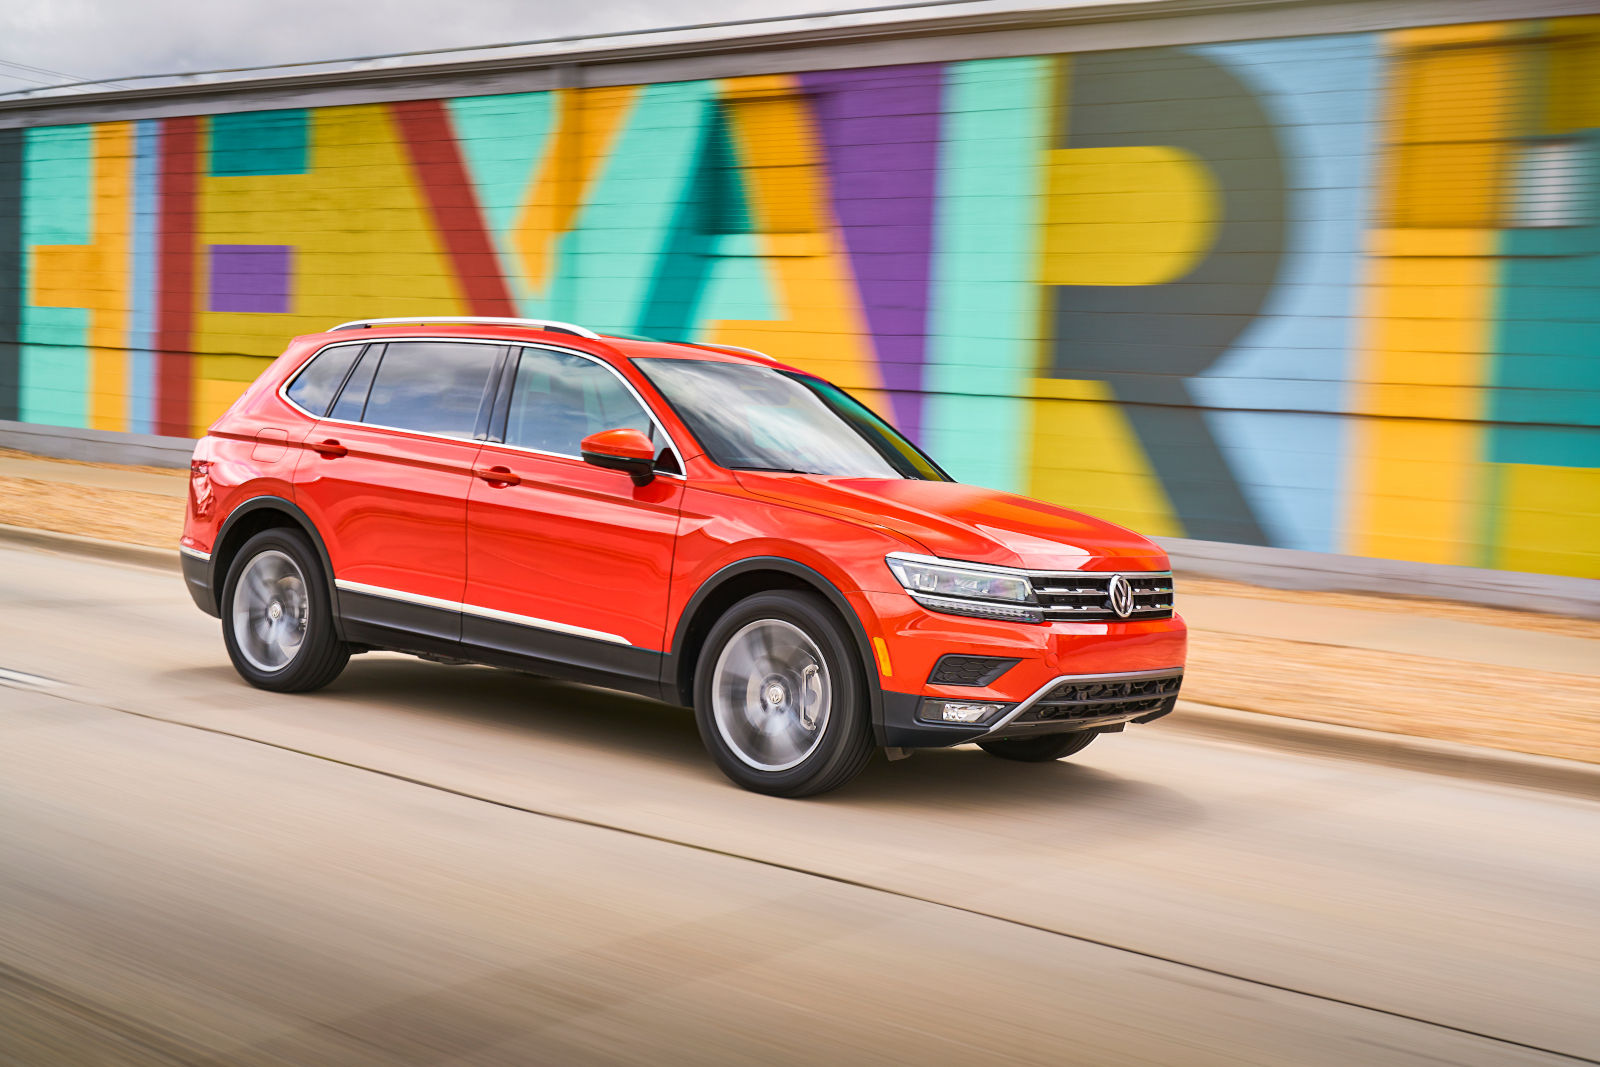 Three Reasons to Buy a Pre-Owned VW Tiguan if You are a Student